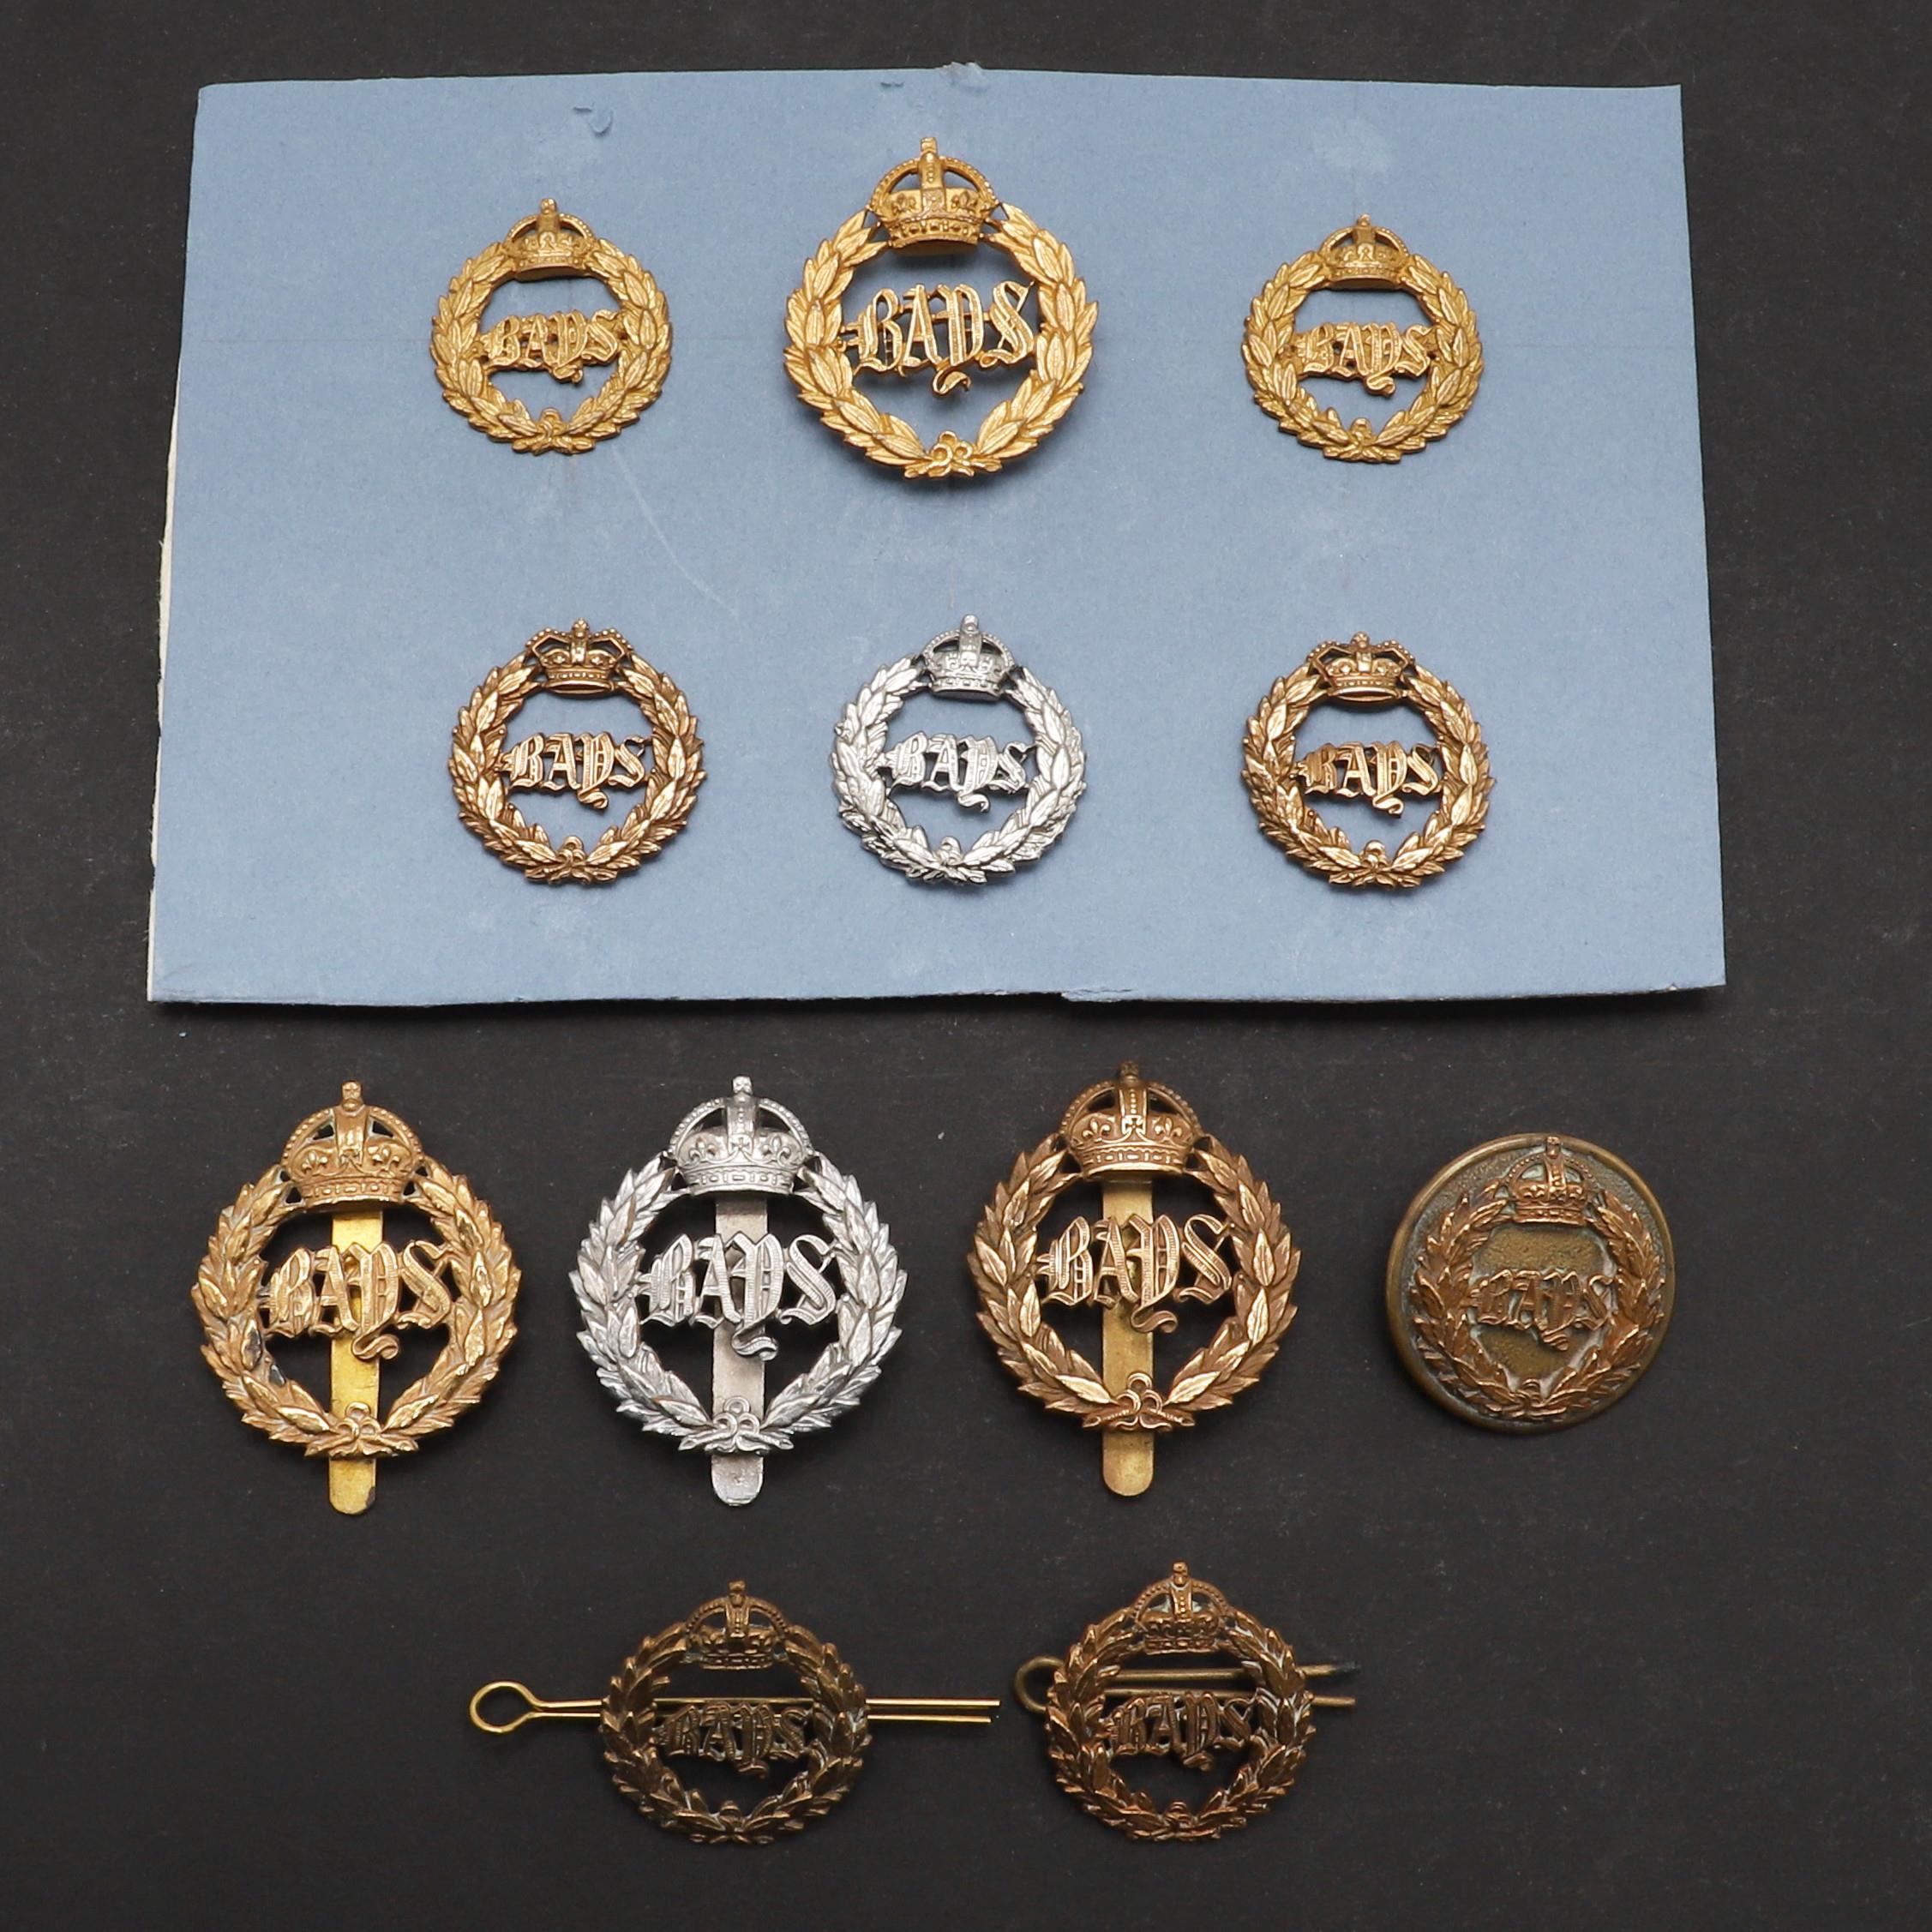 AN INTERESTING COLLECTION OF 2ND DRAGOON GUARDS CAP AND OTHER BADGES.